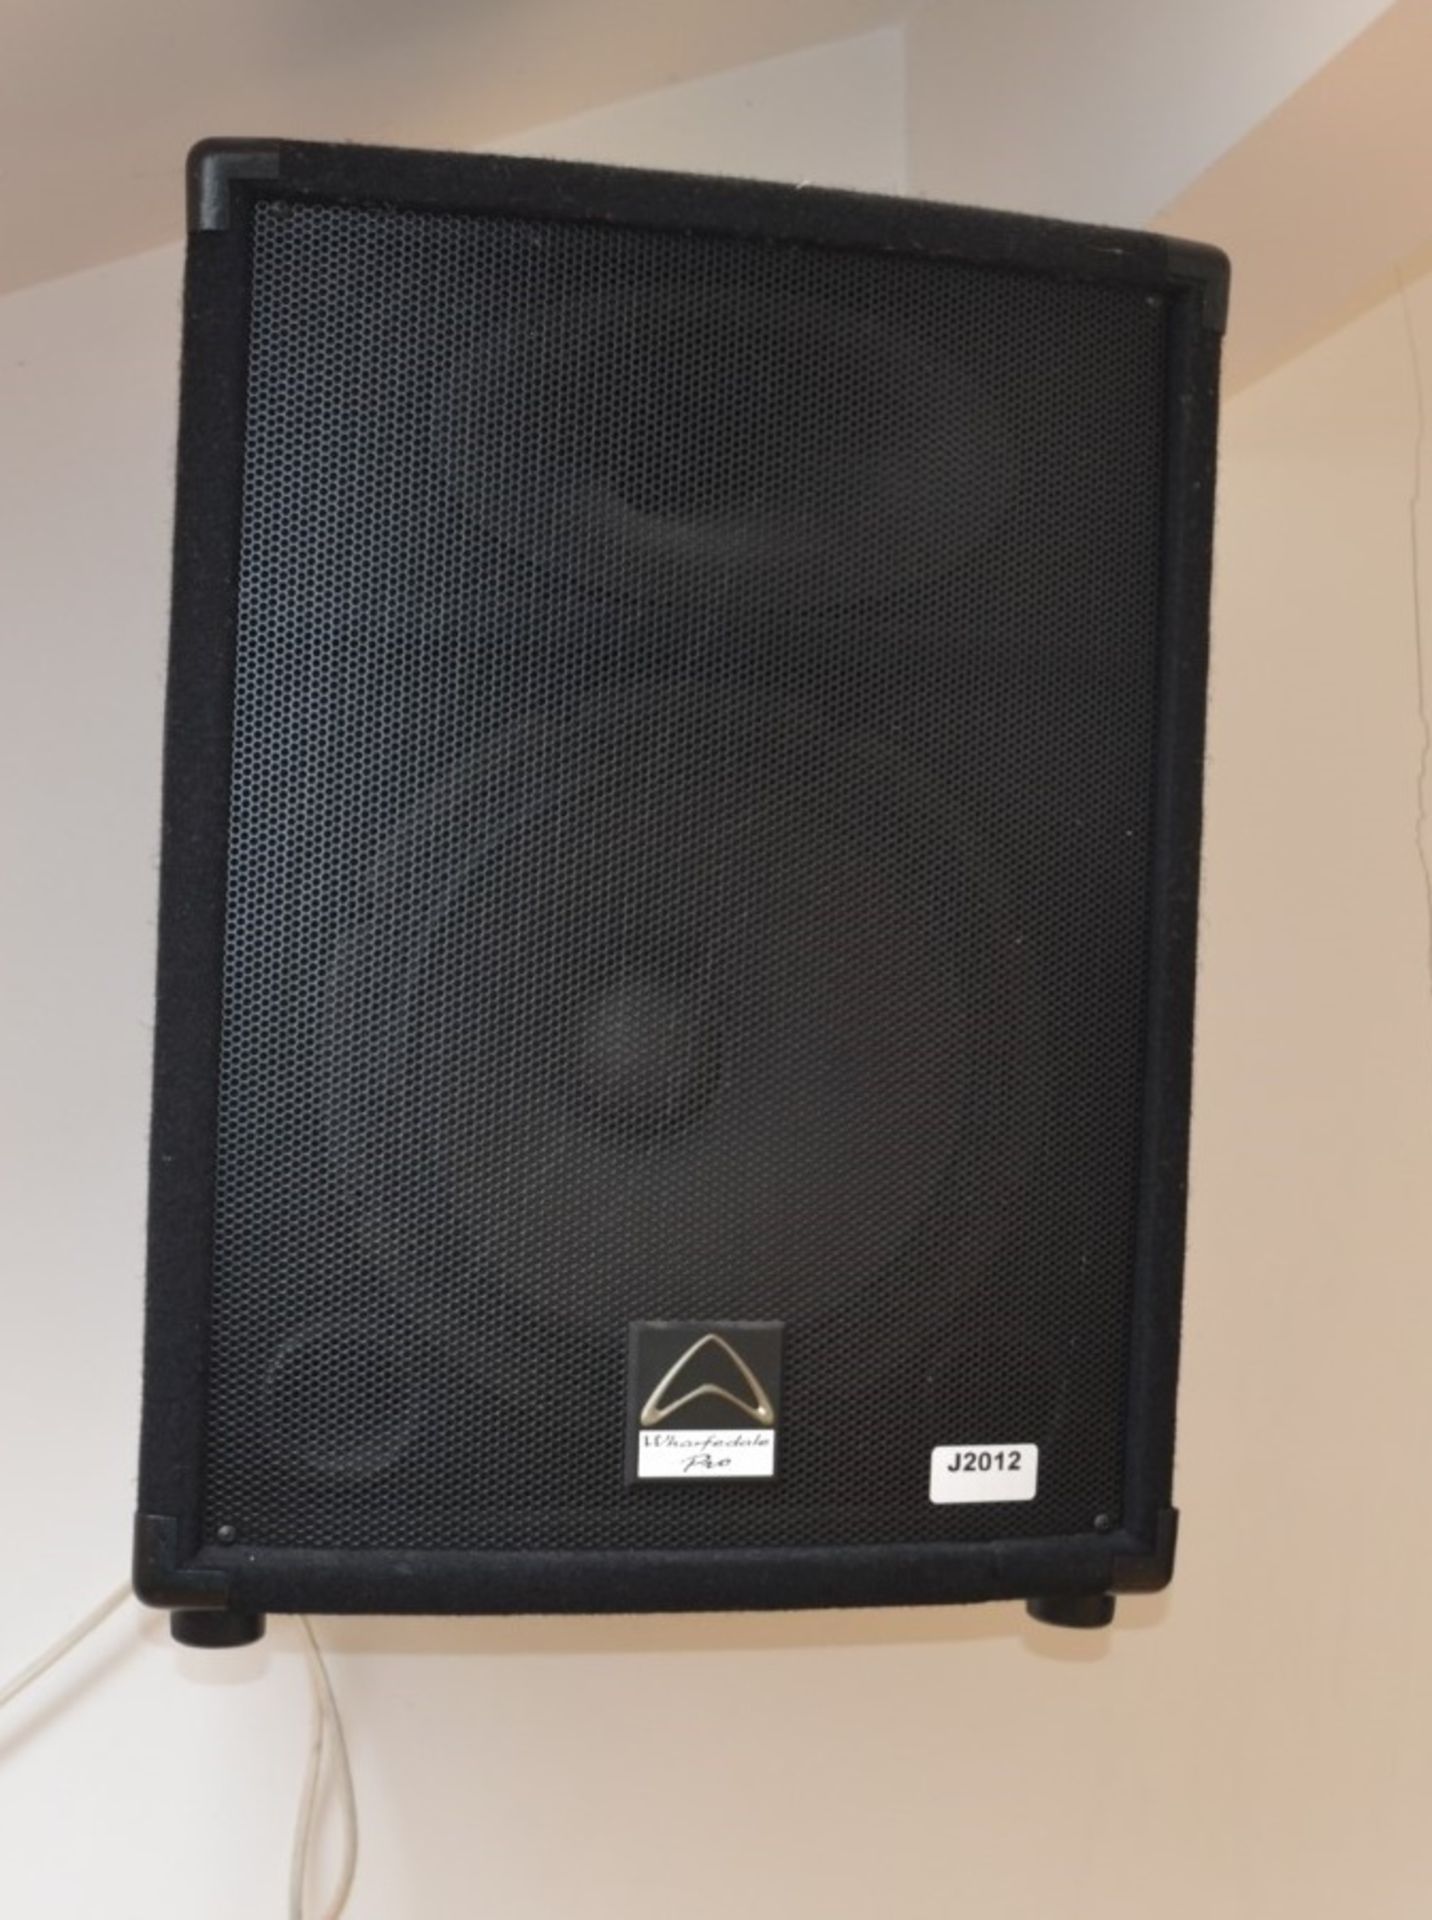 2 x Wharfedale Pro SVP PA Speakers With Wall Mounting Brackets - Image 2 of 4